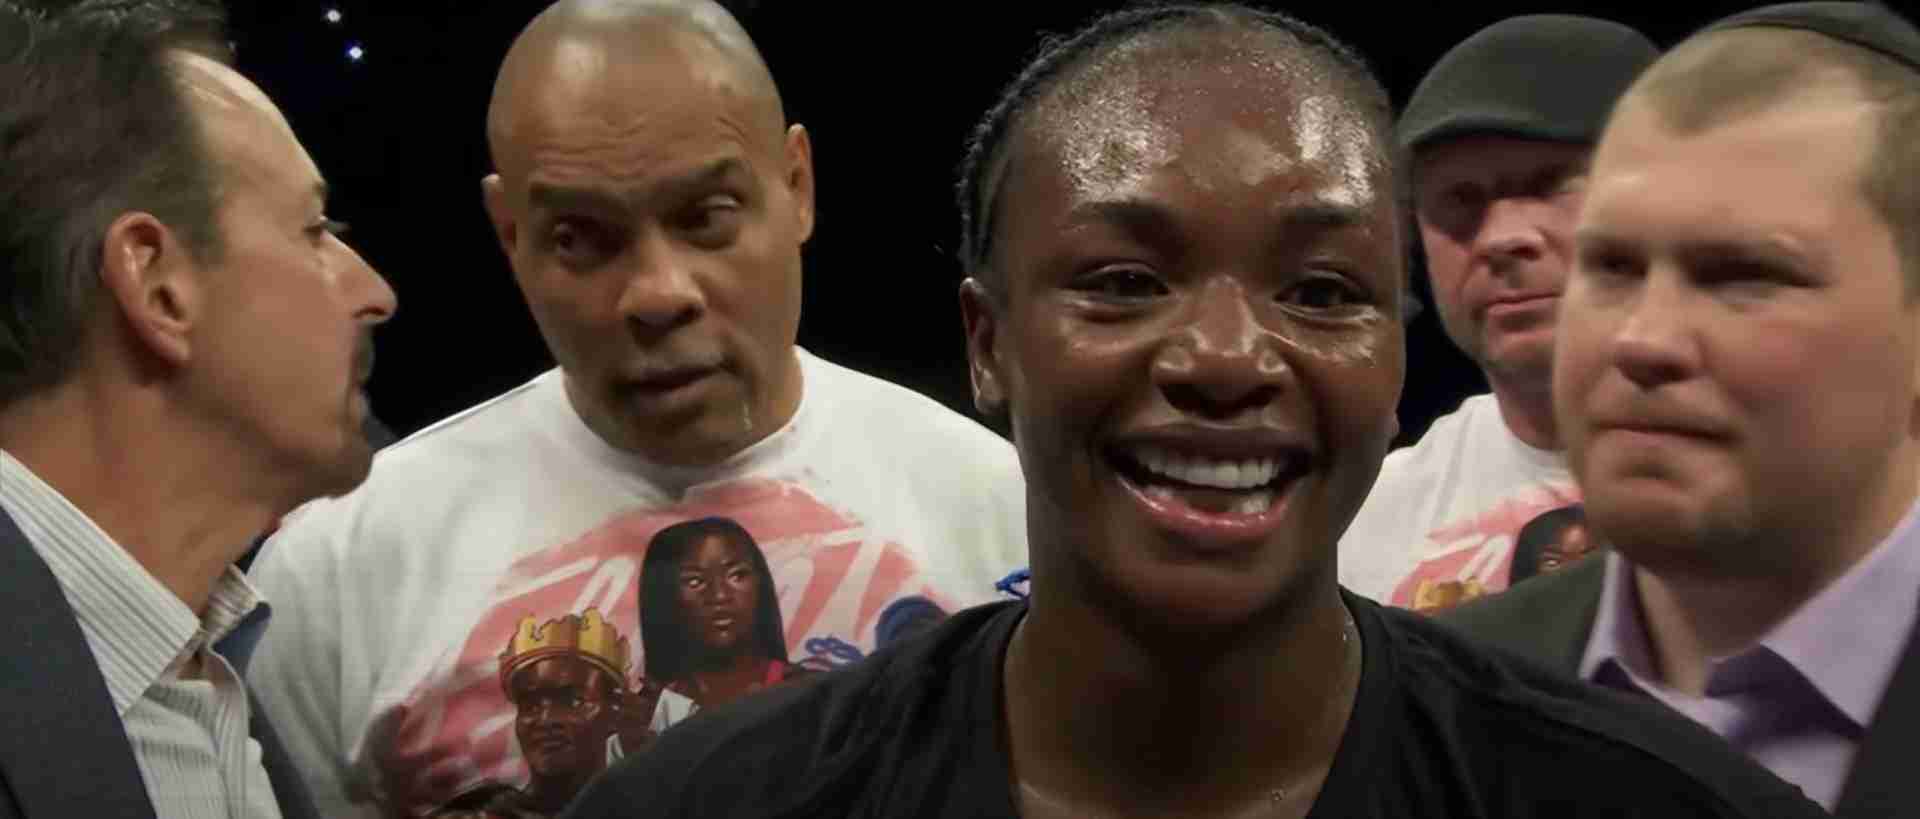 Watch: Claressa Shields Becomes The Best Women’s Boxer Pound For Pound and Best Female Boxer Of All Time